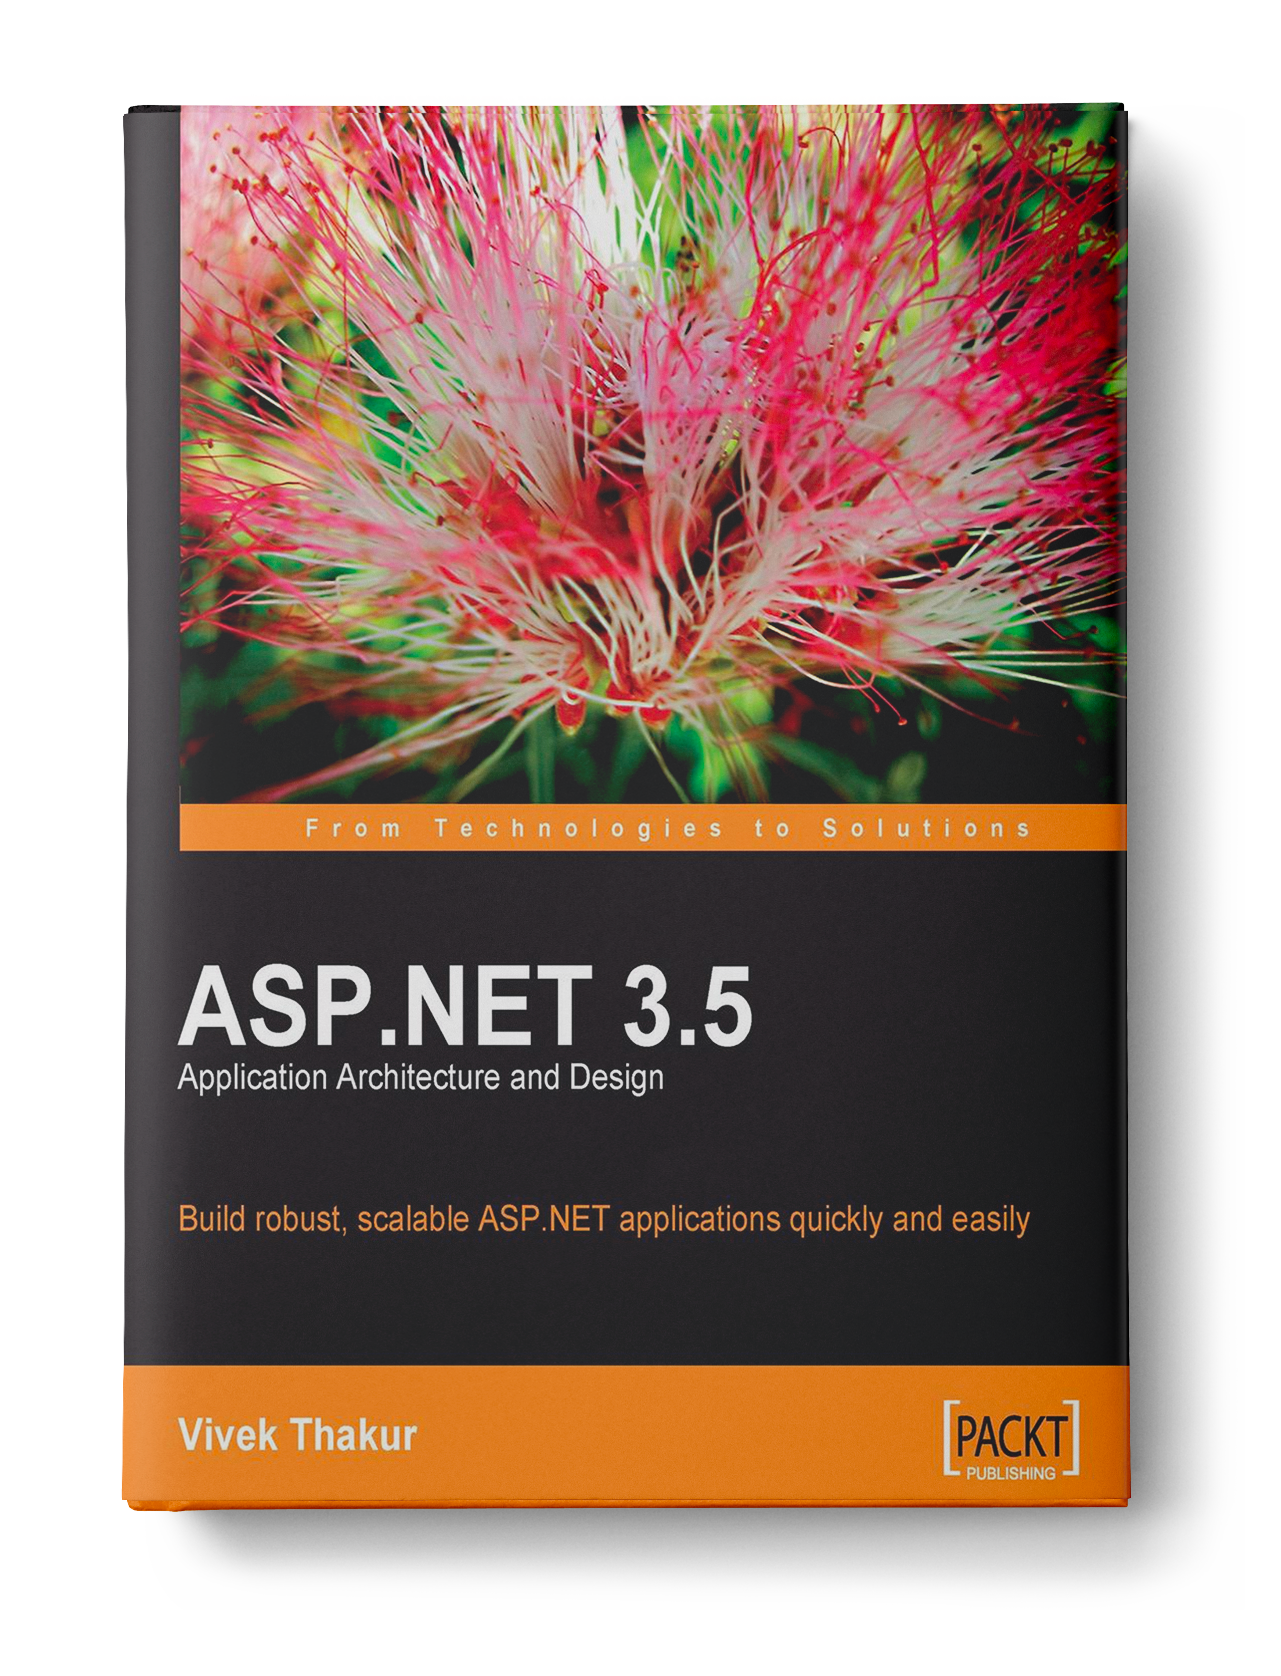 ASP.NET 3.5 Application Architecture and Design. Build better software.